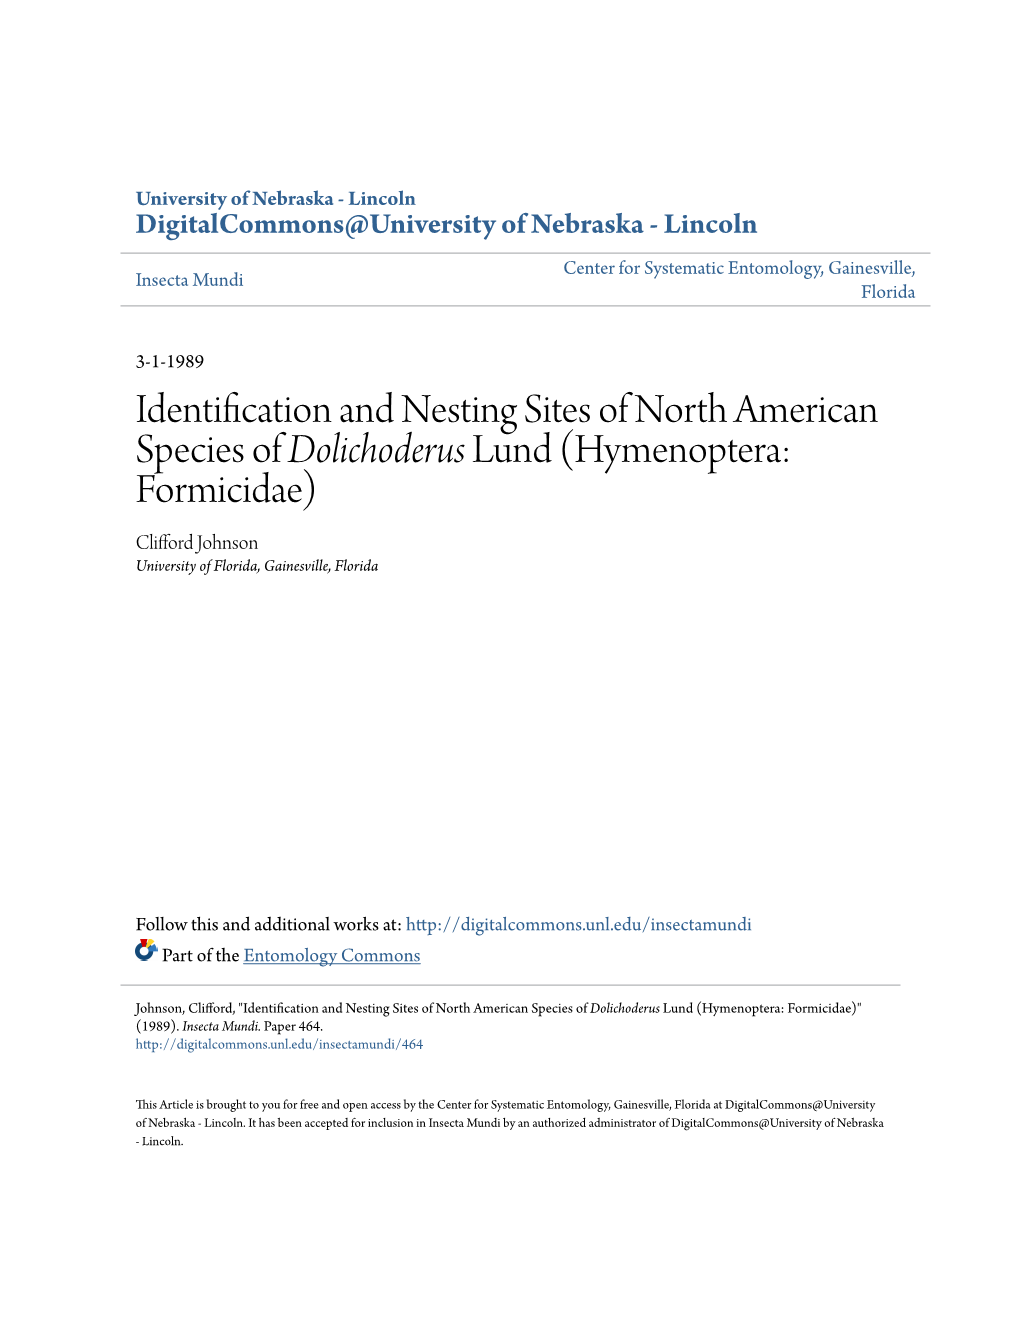 Identification and Nesting Sites of North American Species of Dolichoderus Lund (Hymenoptera: Formicidae) Clifford Johnson University of Florida, Gainesville, Florida